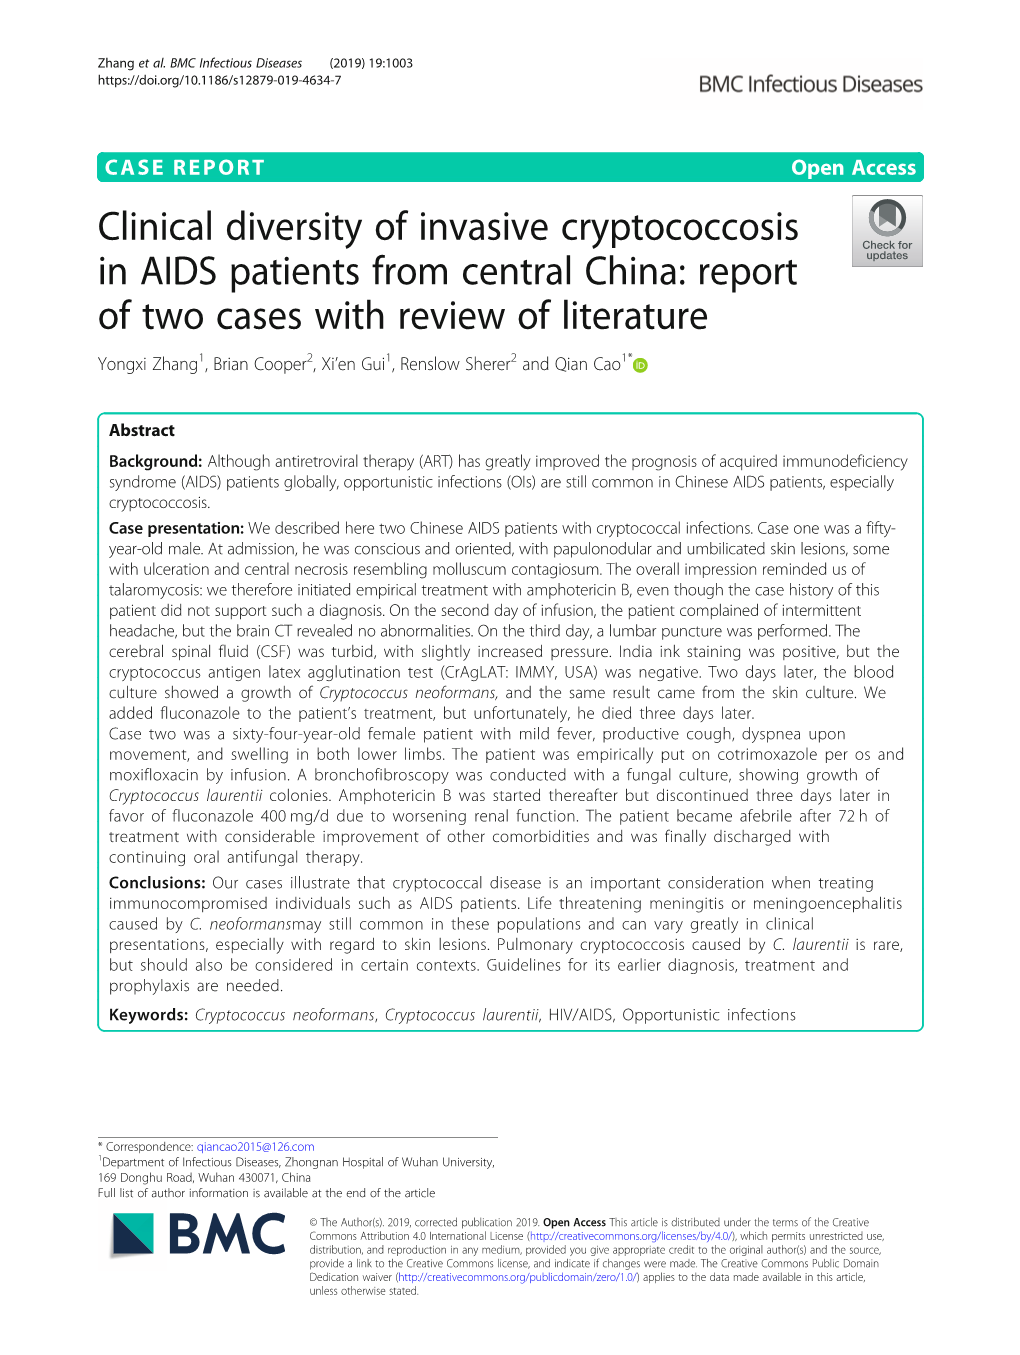 Clinical Diversity of Invasive Cryptococcosis in AIDS Patients